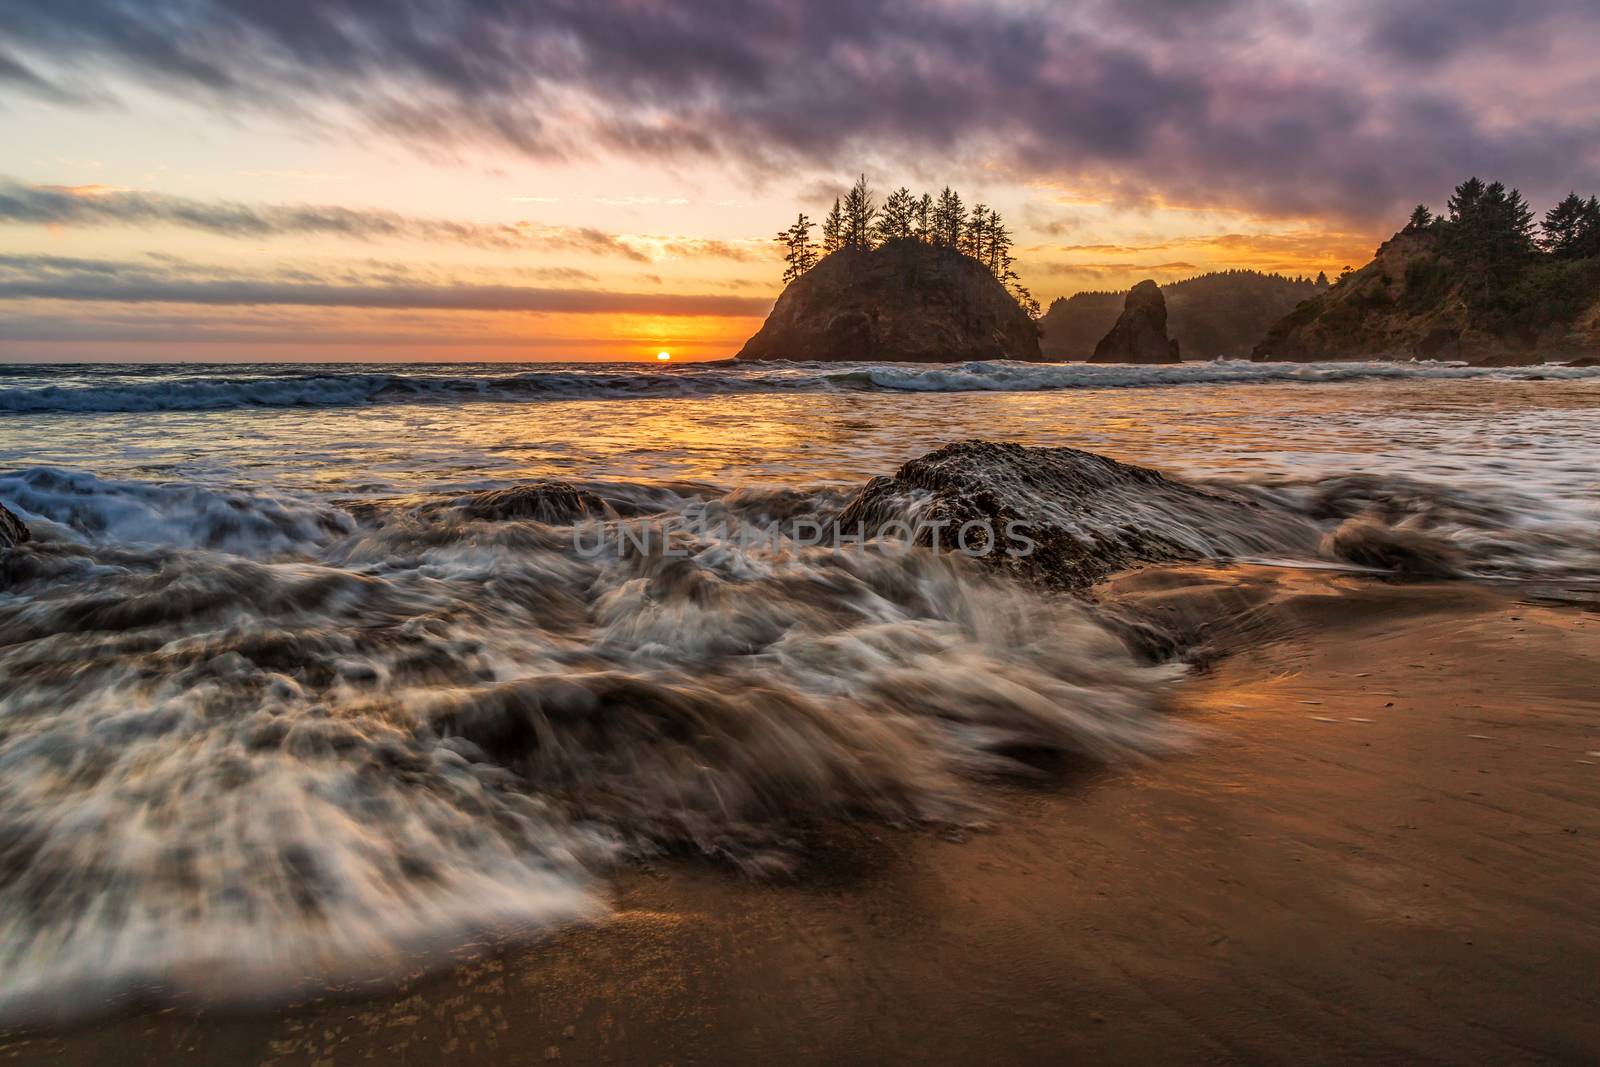 Sunset at a Rocky Beach in Trinidad, California by backyard_photography